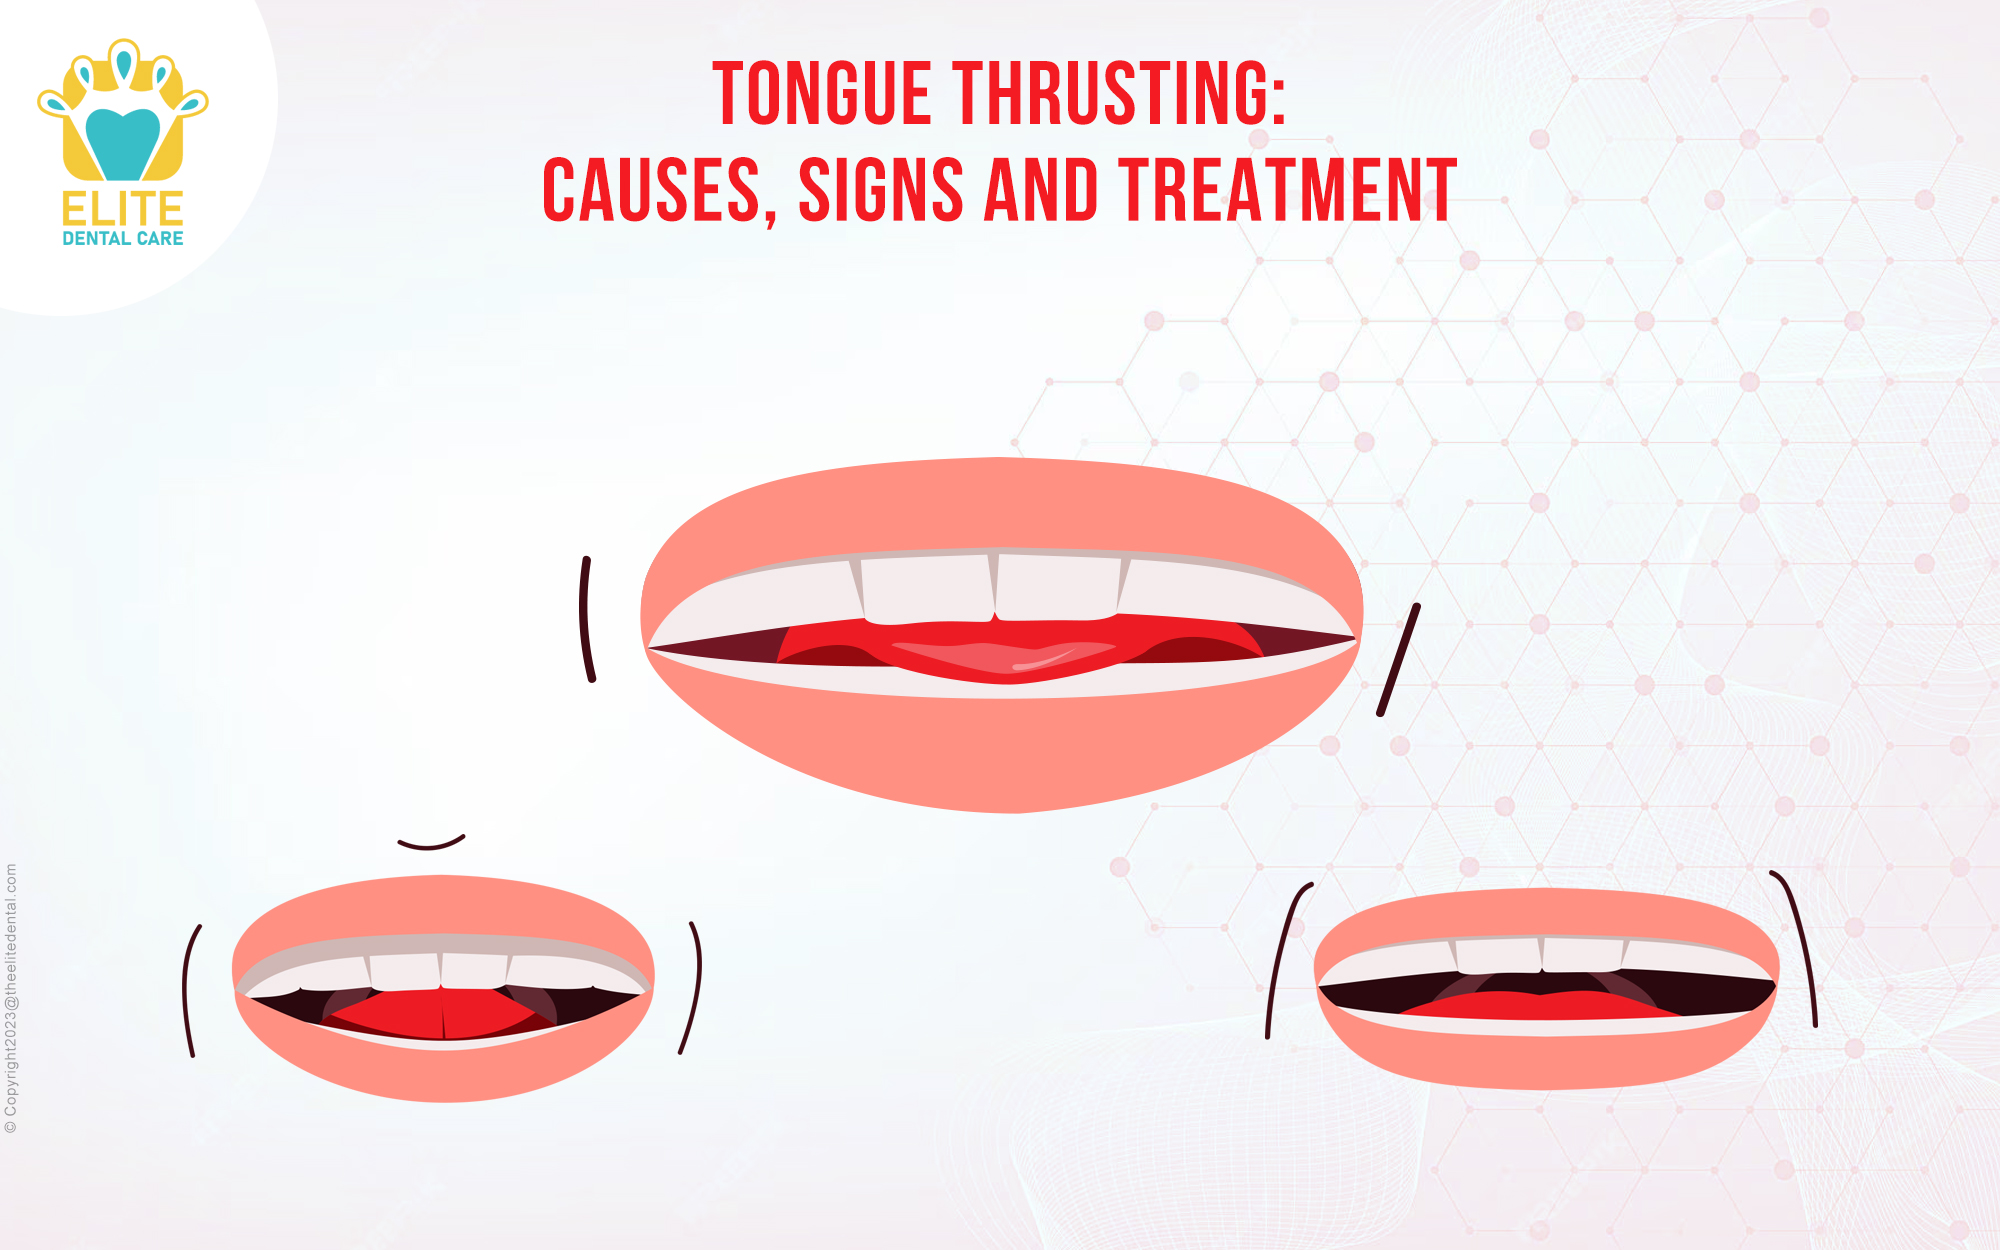 TONGUE THRUSTING: CAUSES, SIGNS, AND TREATMENT